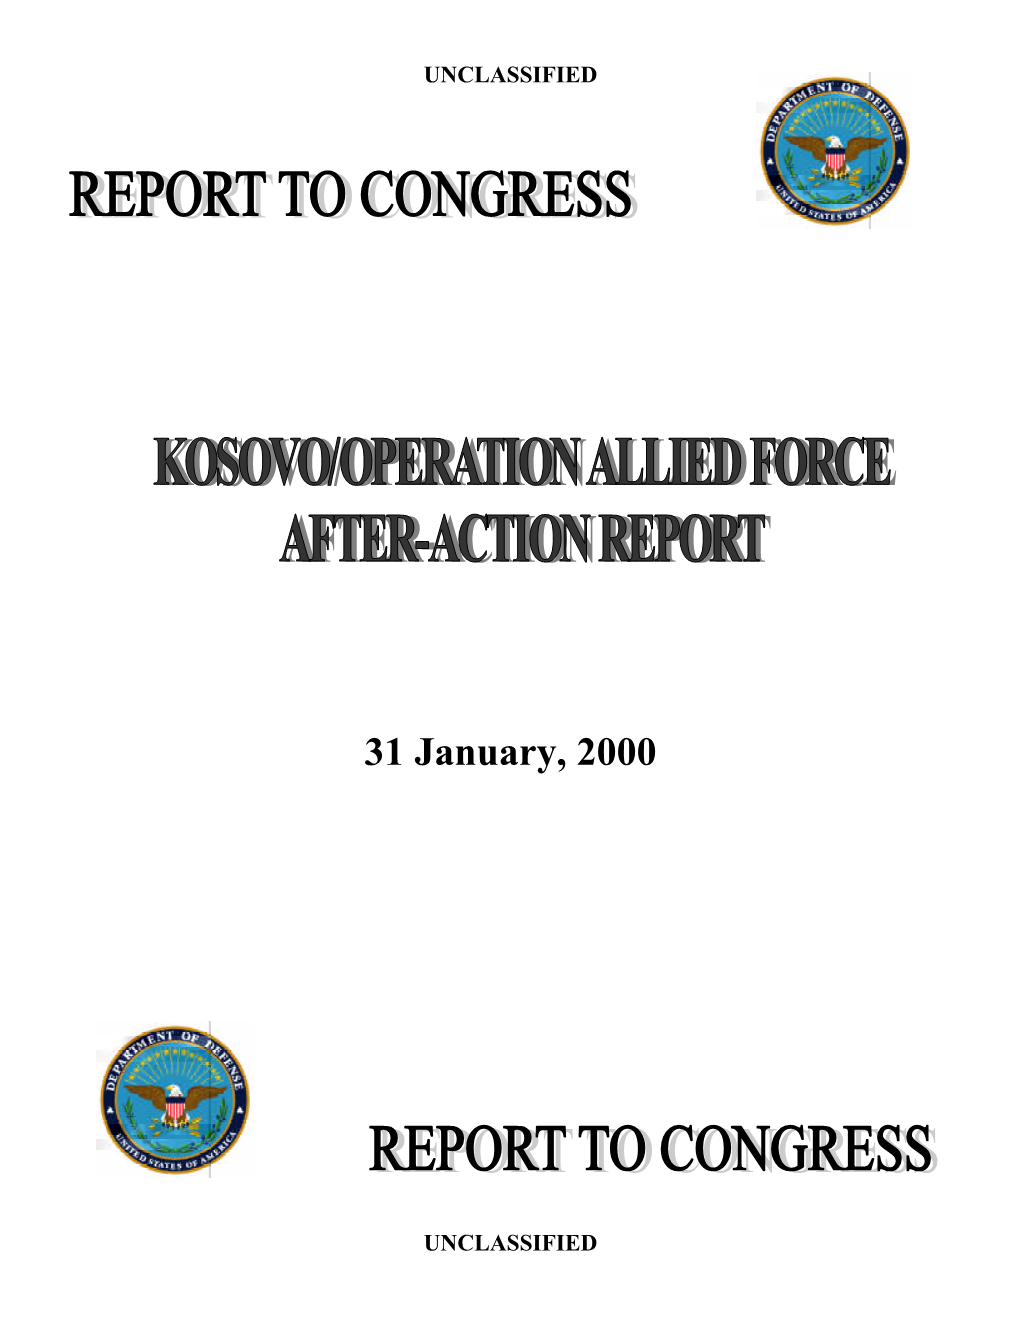 Kosovo/Operation Allied Force After-Action